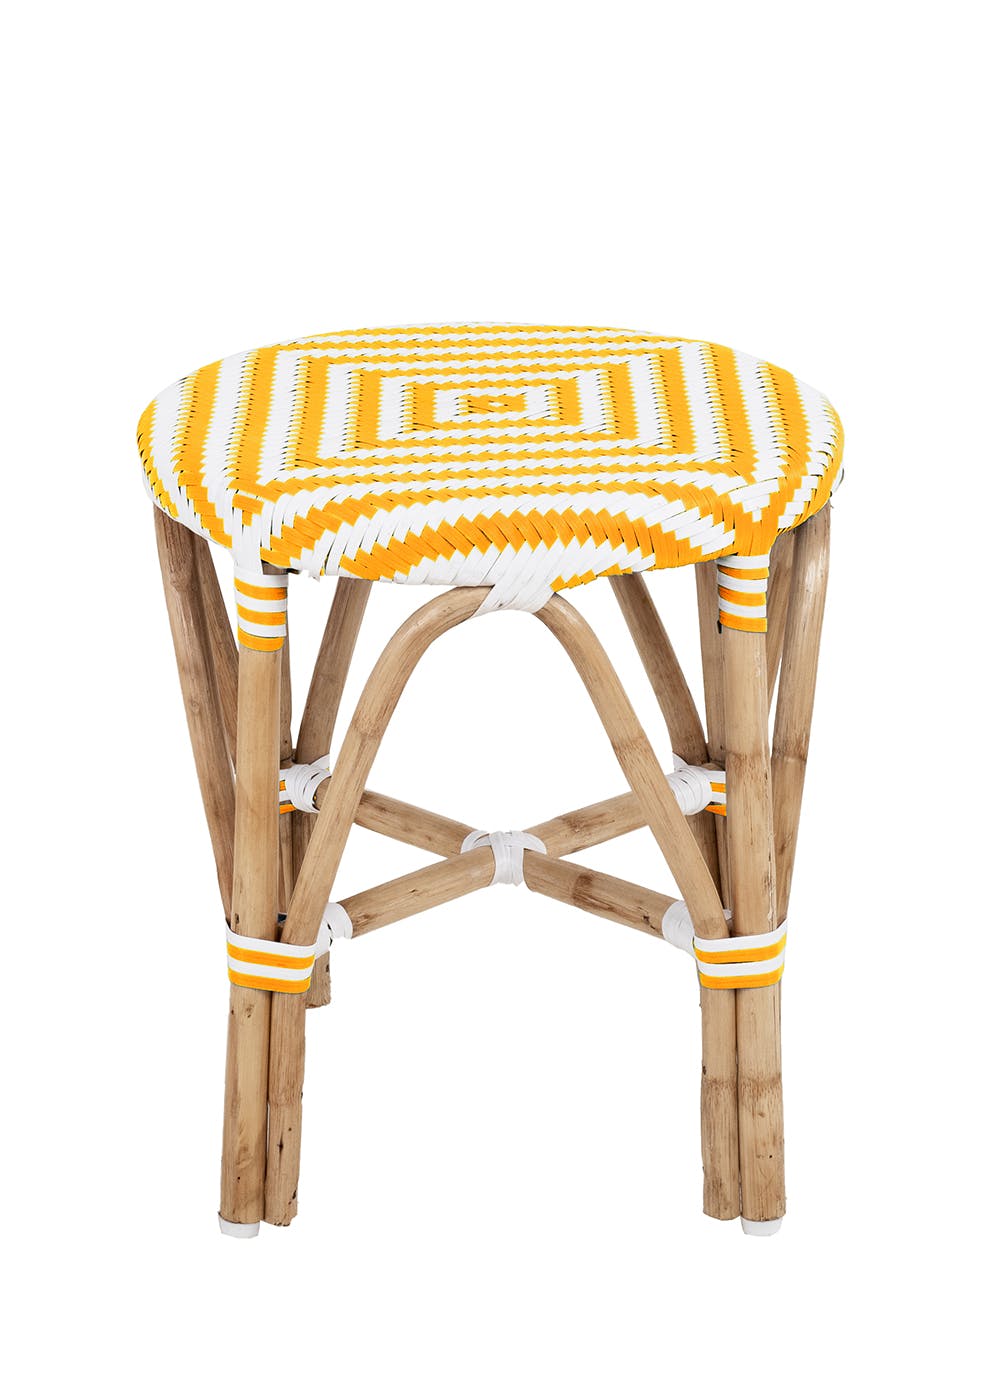 Popsicle Cane Frame Table - Yellow